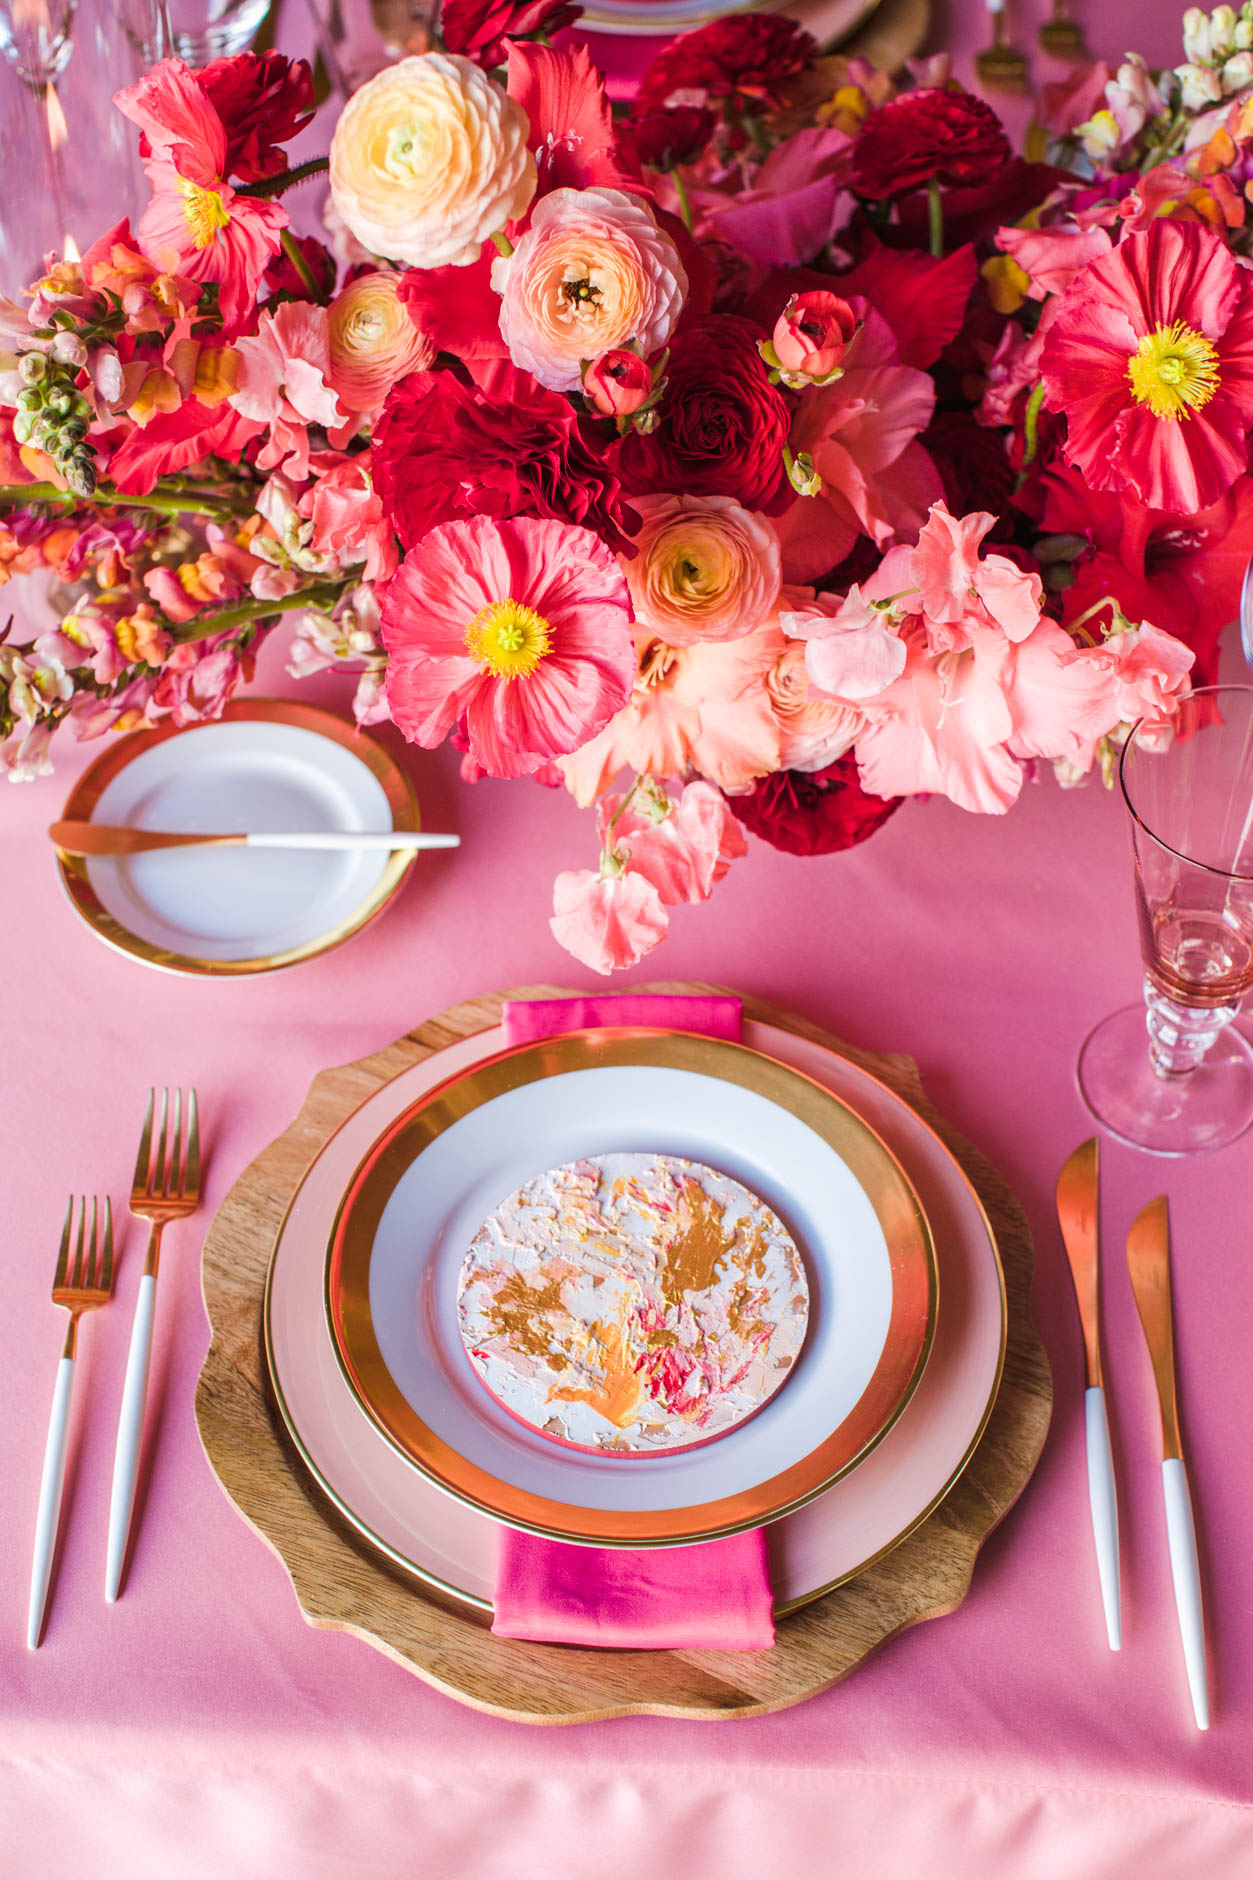 Beautiful place setting with bright pinks, icelandic poppies and hand-painted menu.